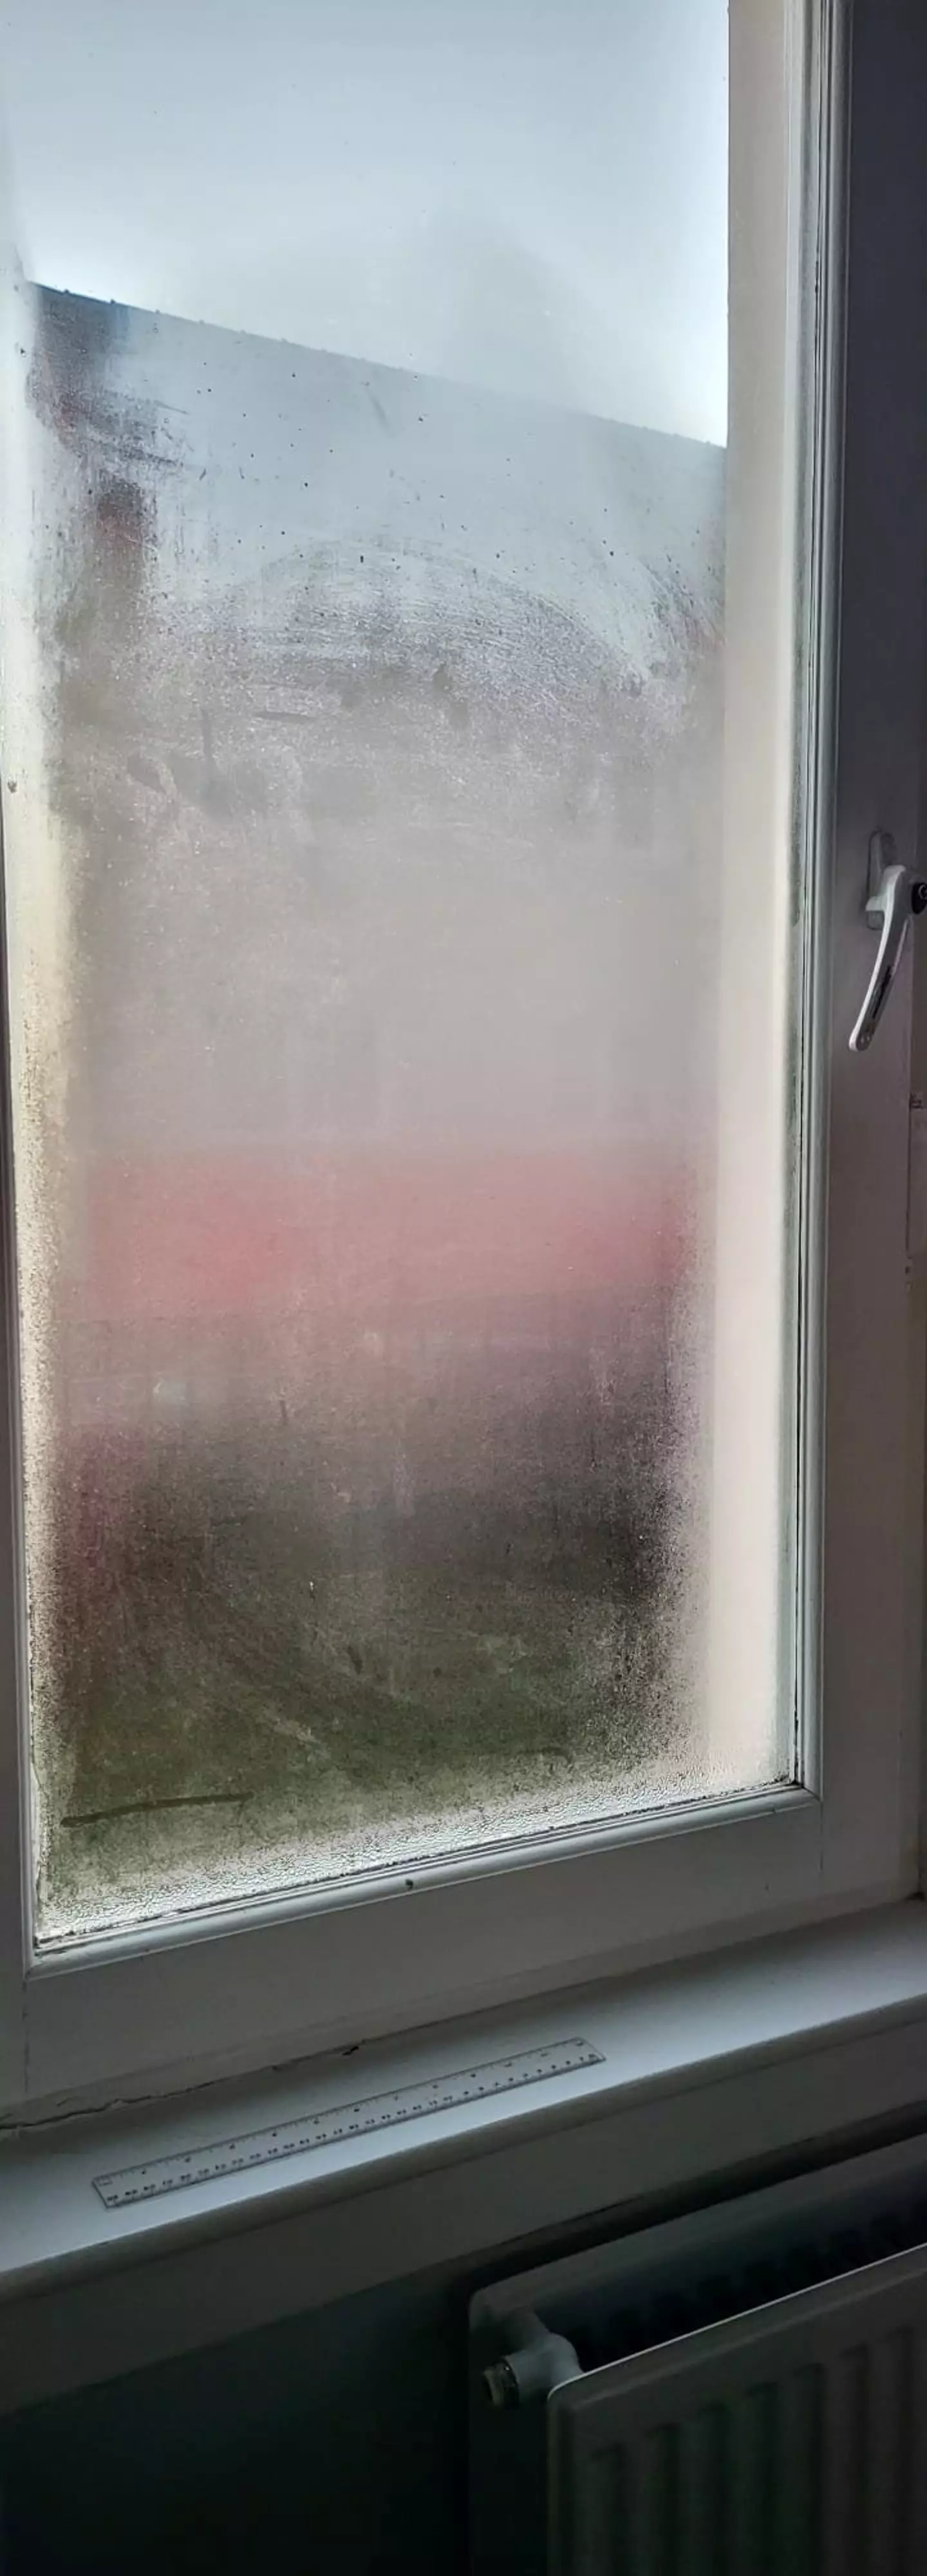 It works on condensation too.